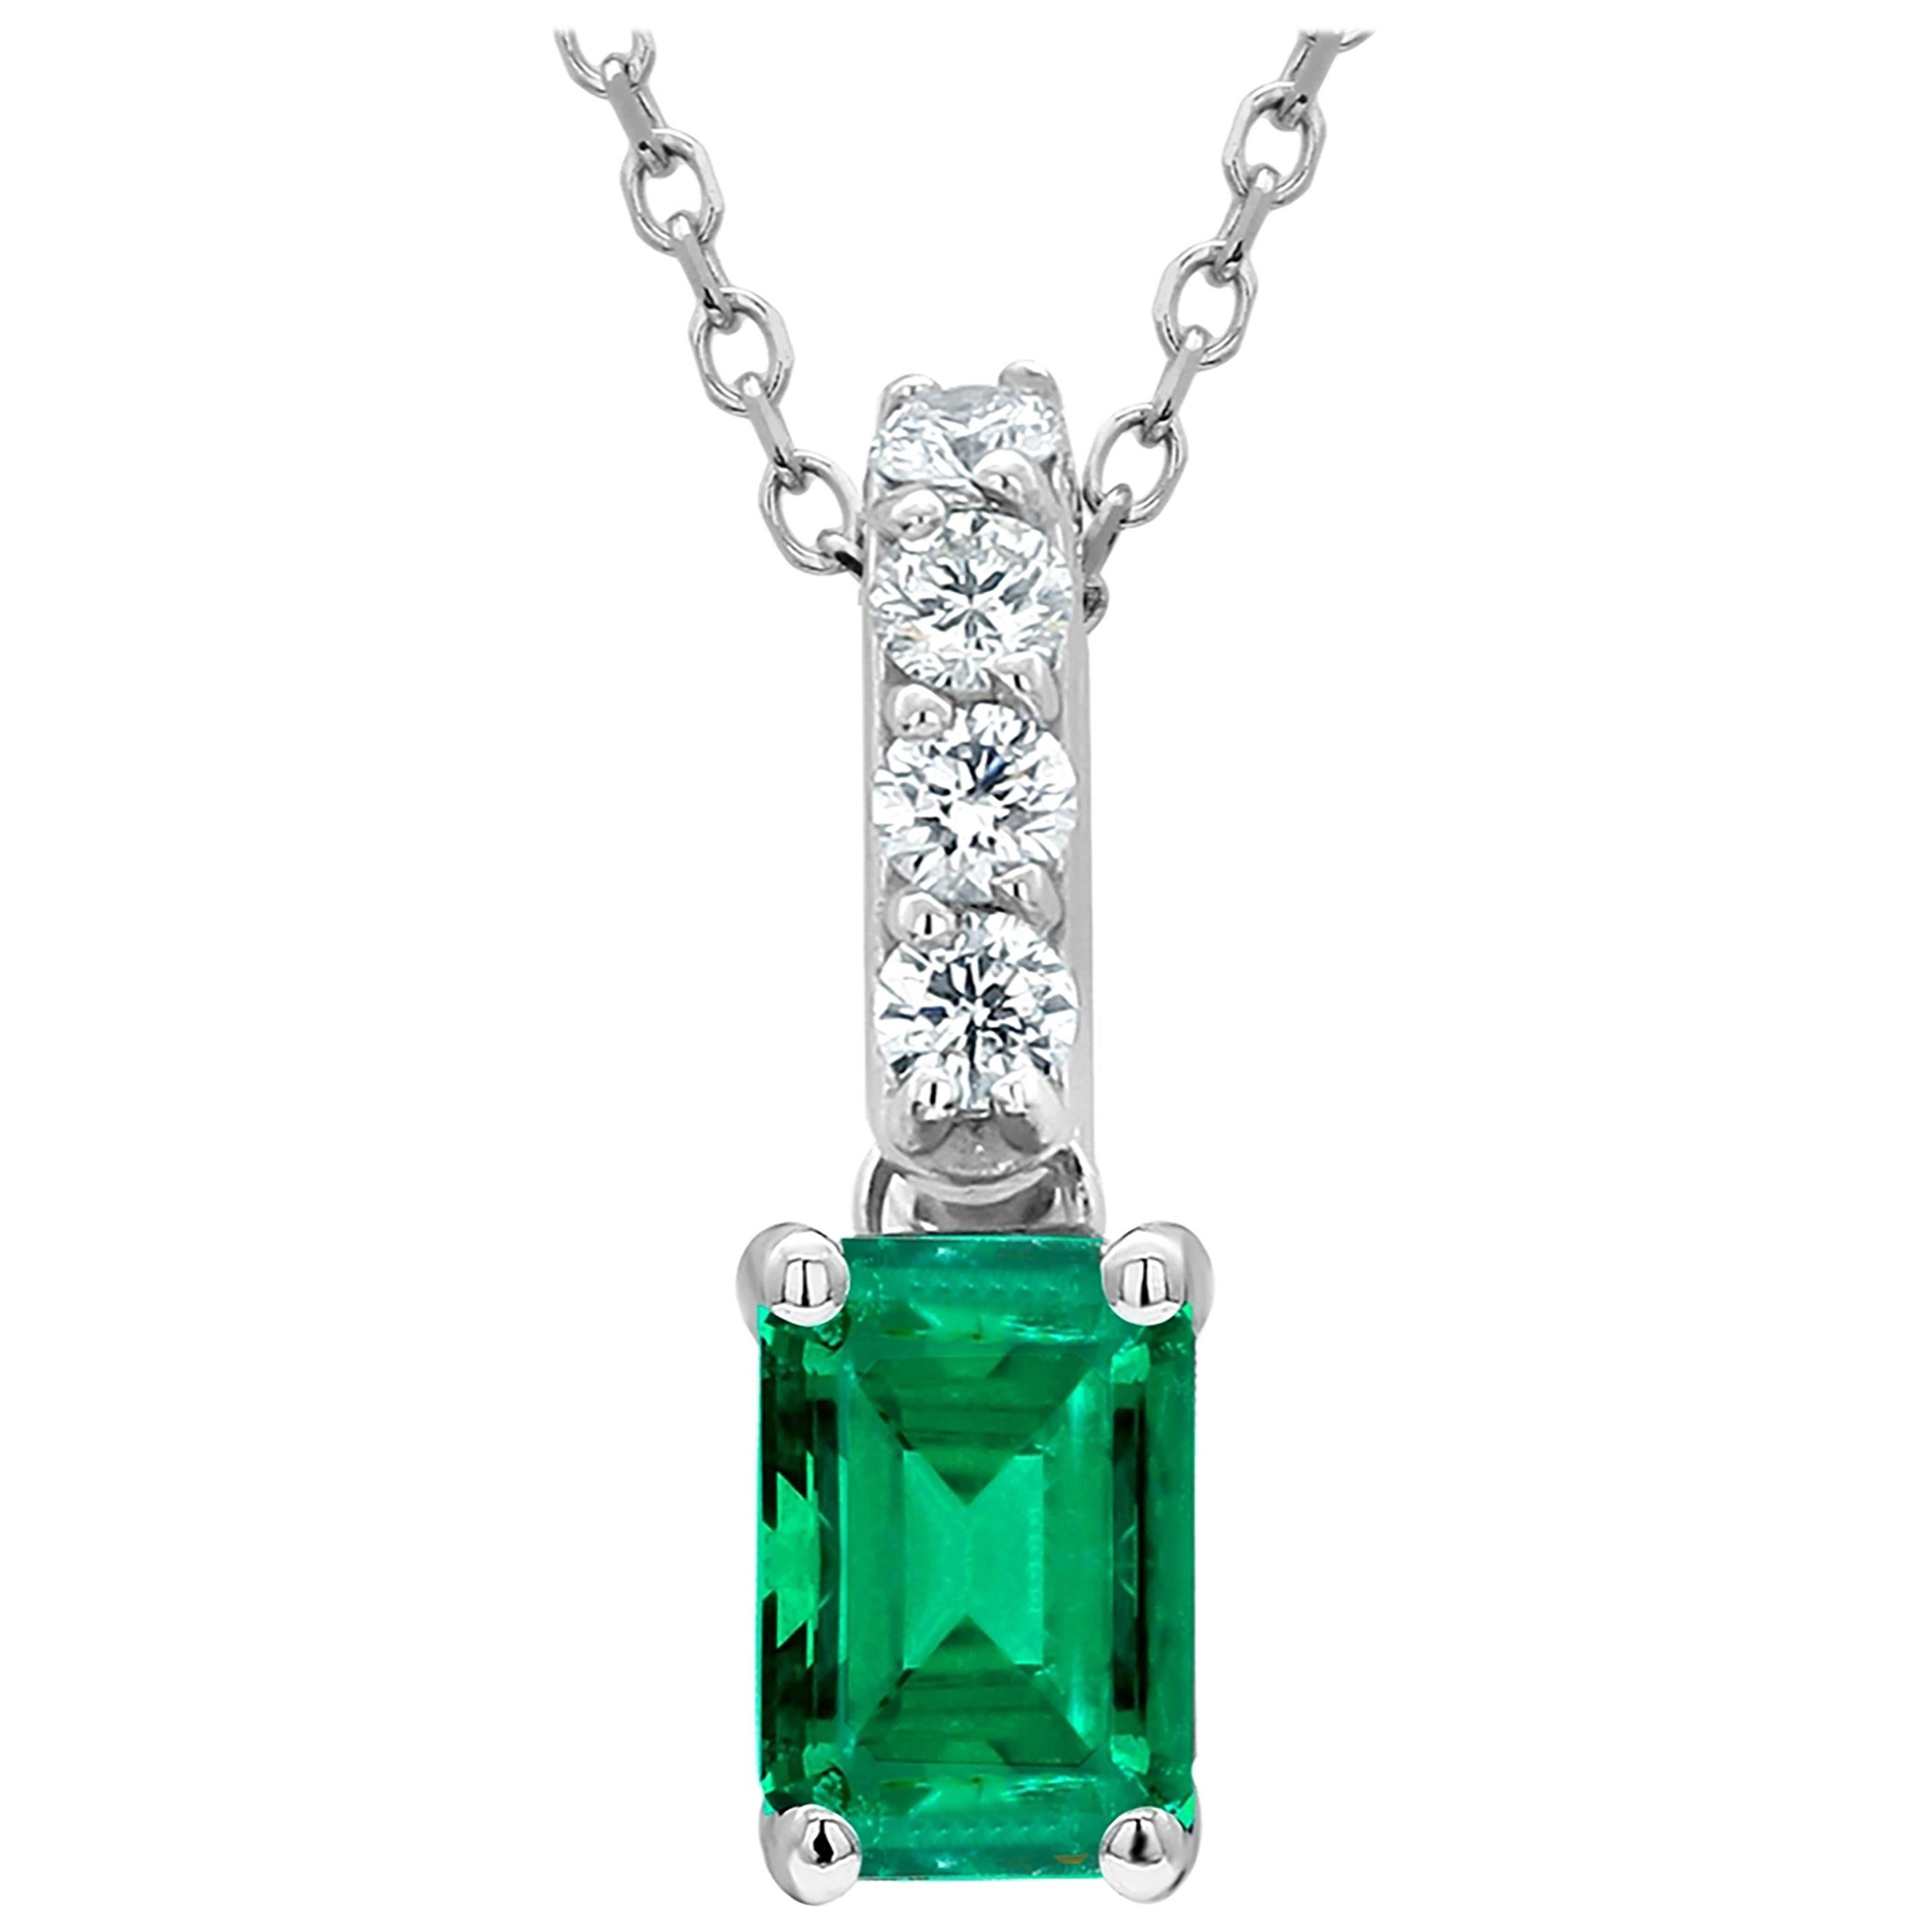 White Gold Drop Pendant Necklace with Emerald and a Diamond Bail 